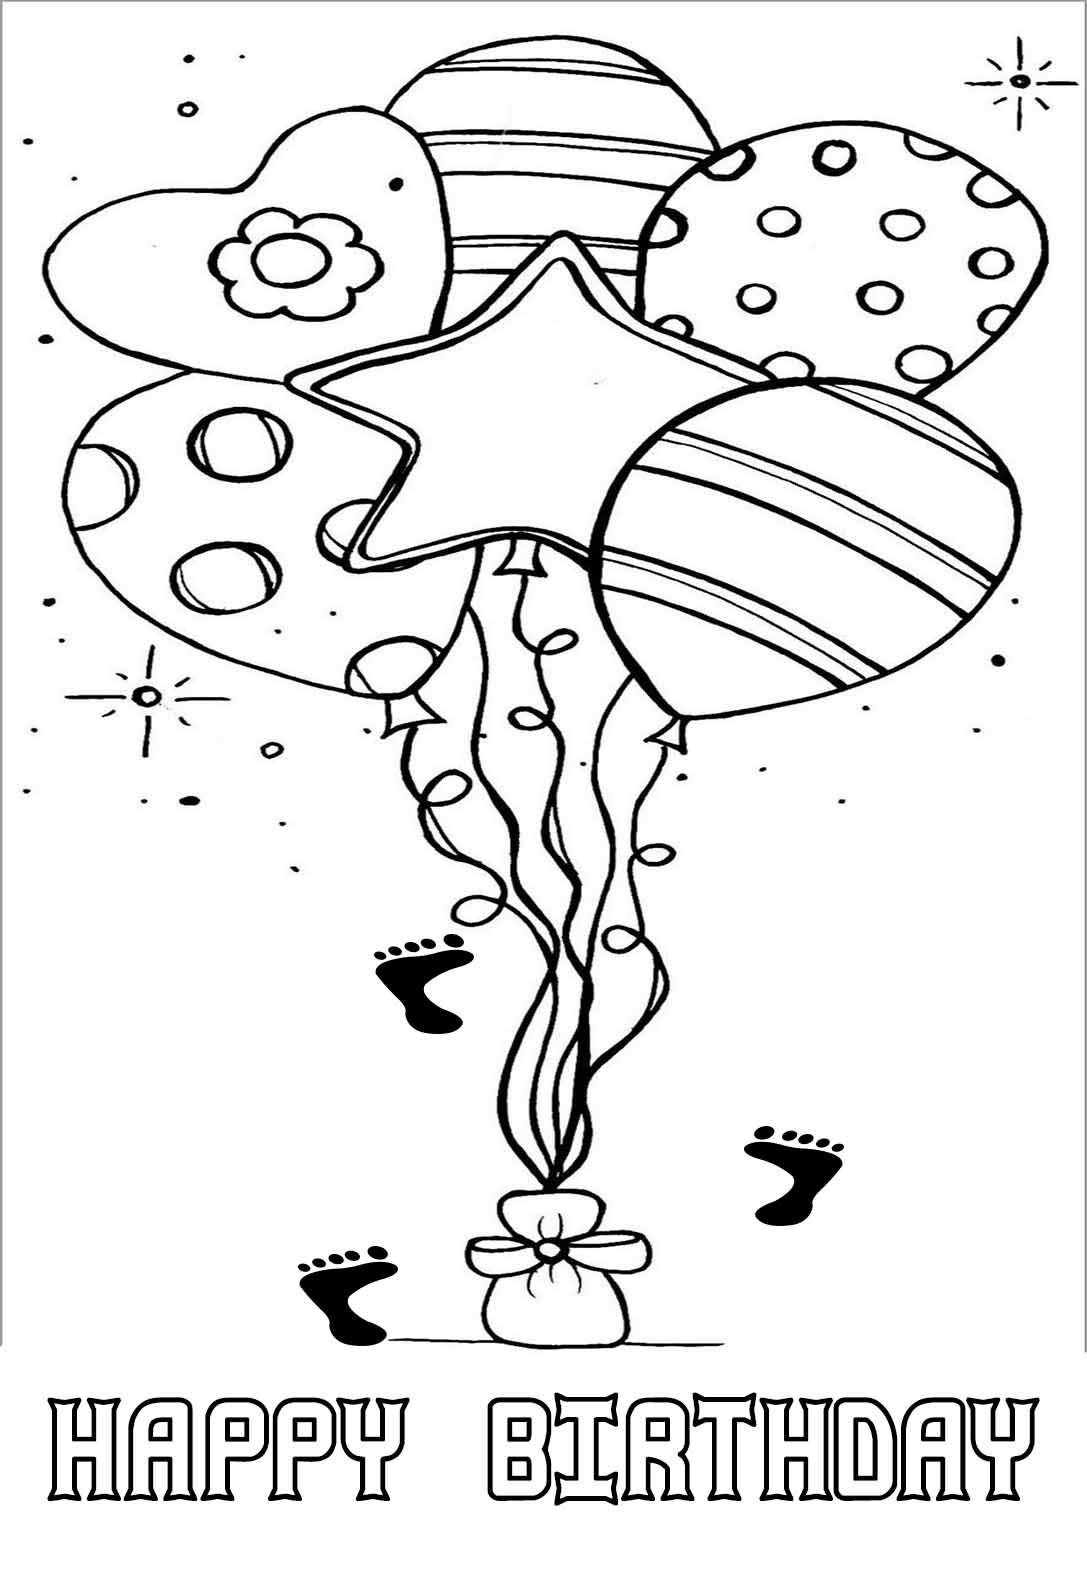 Fabulous Coloring Pages of Birthday Balloons + Cards (free ...